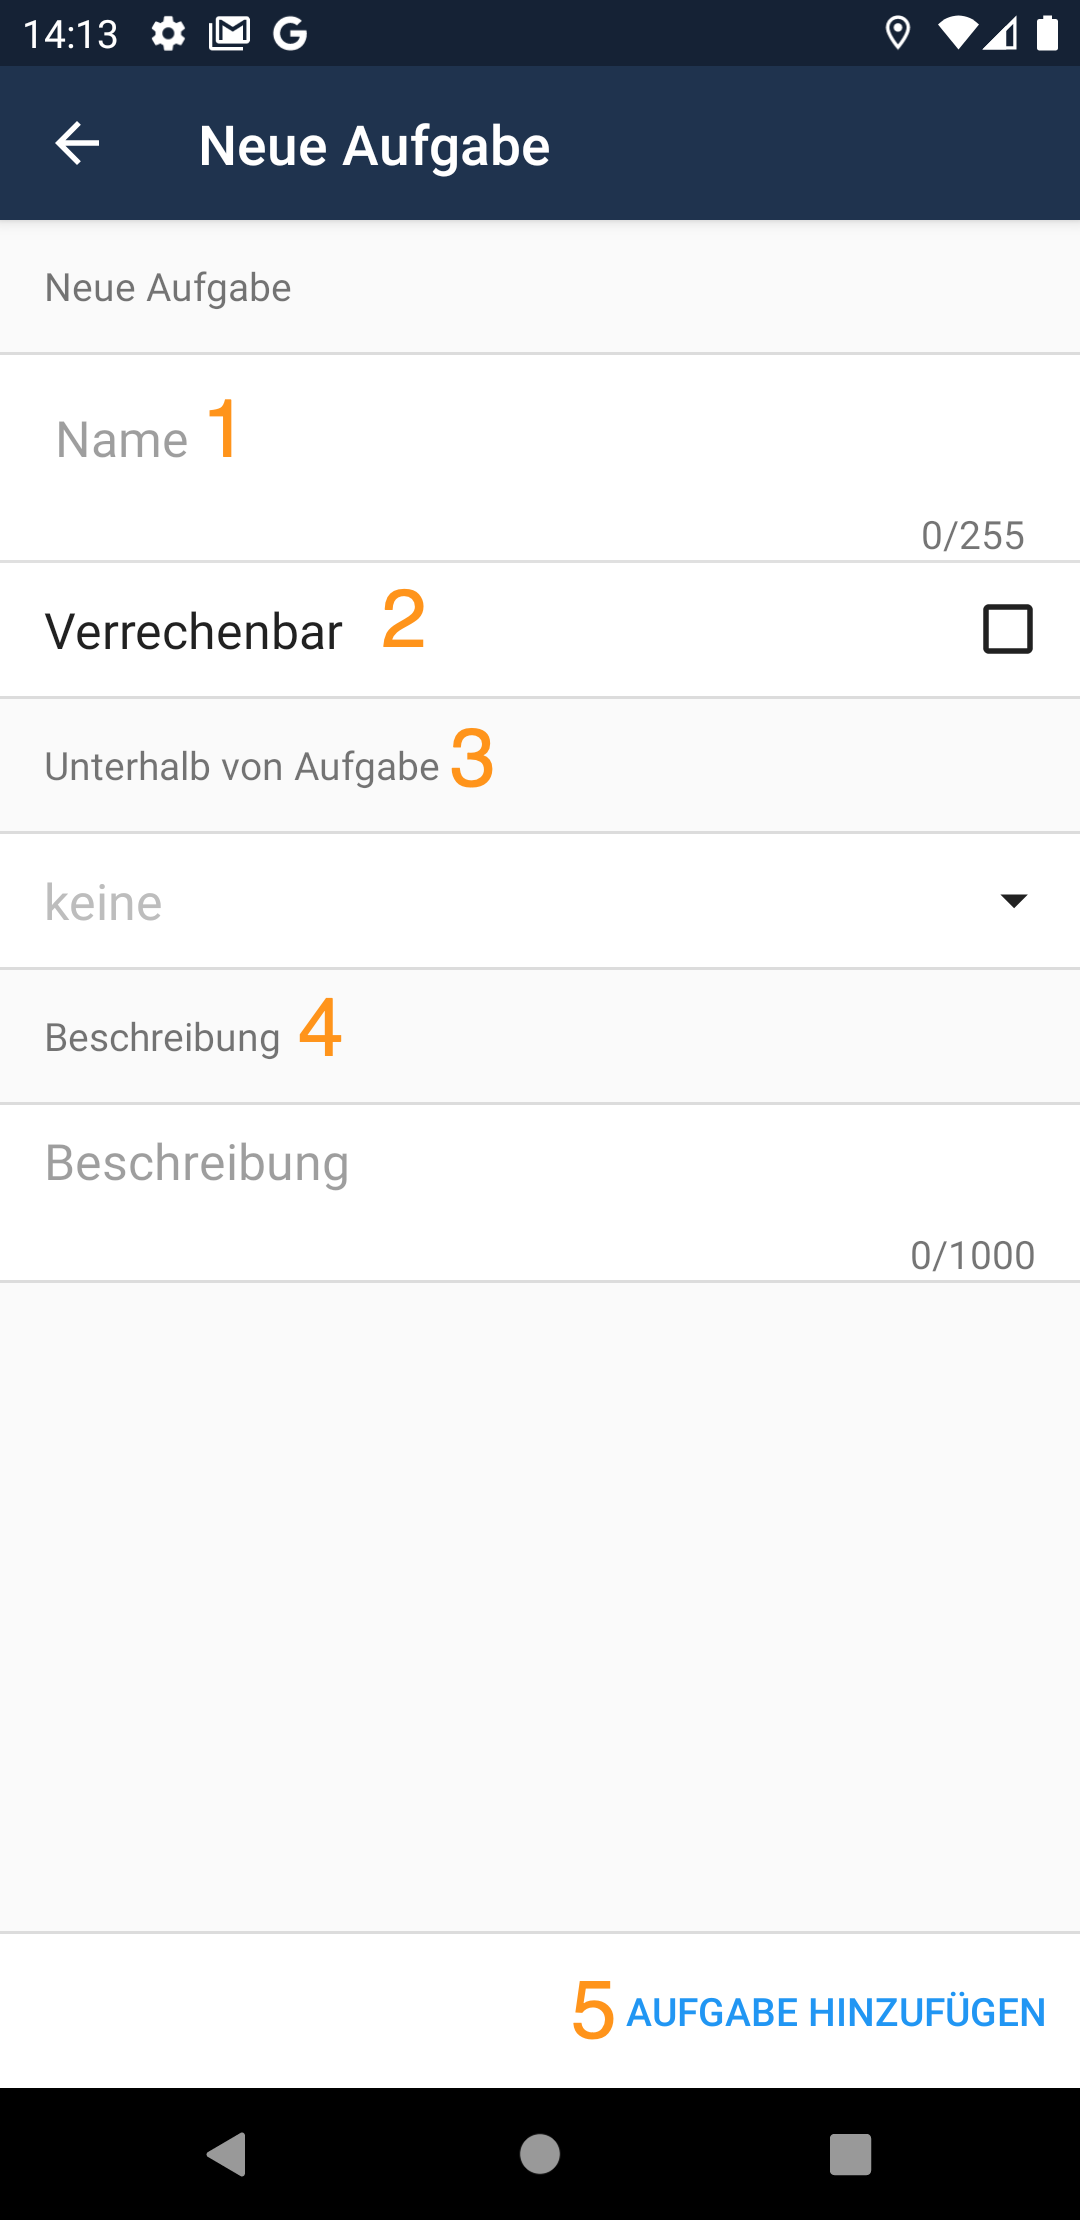 Neue_Aufgabe_Android.png